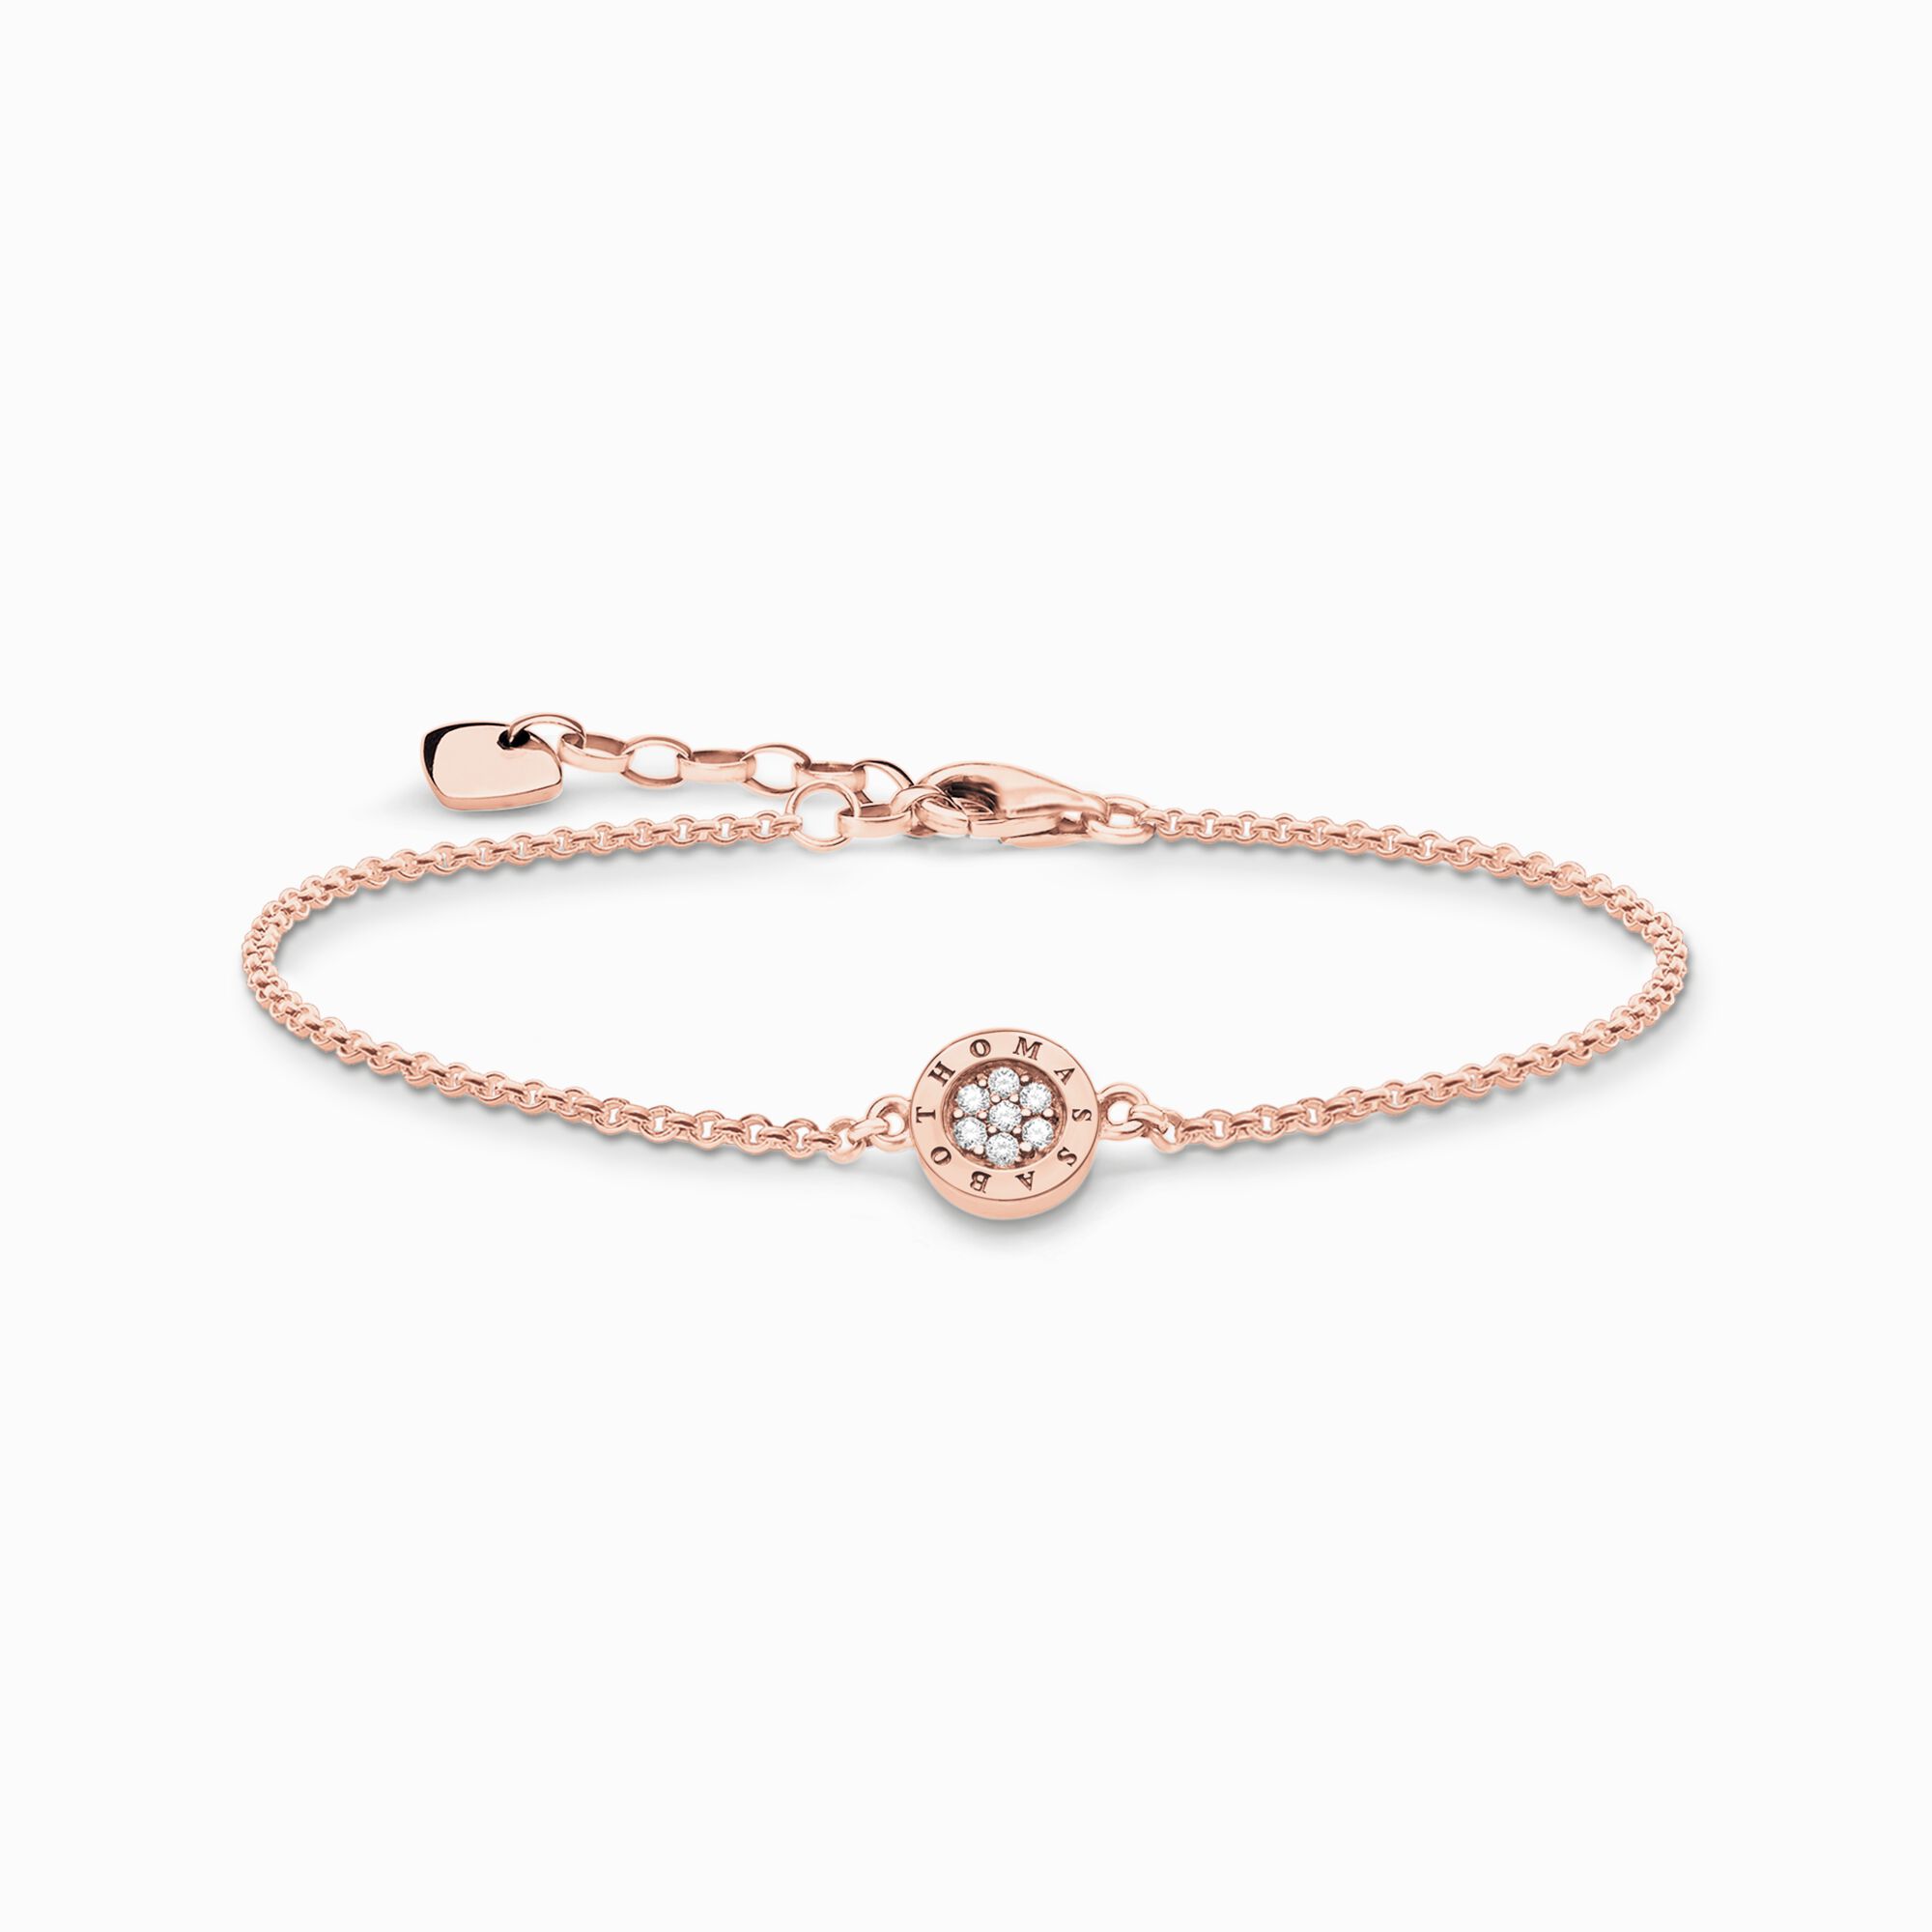 Bracelet classic pav&eacute; rose gold from the  collection in the THOMAS SABO online store